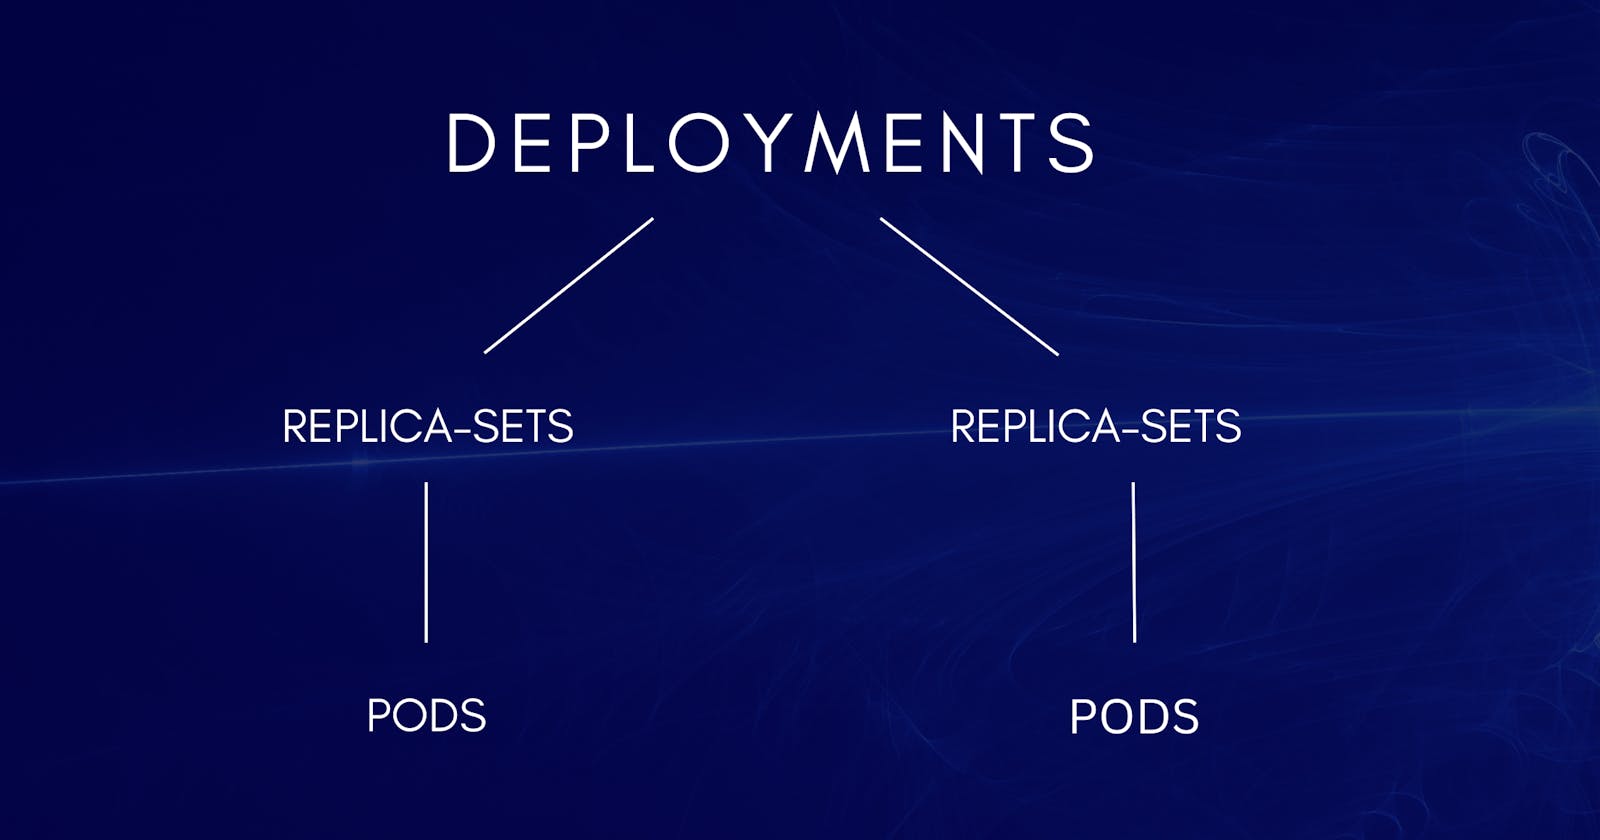 What are Deployments and ReplicaSets in Kubernetes?